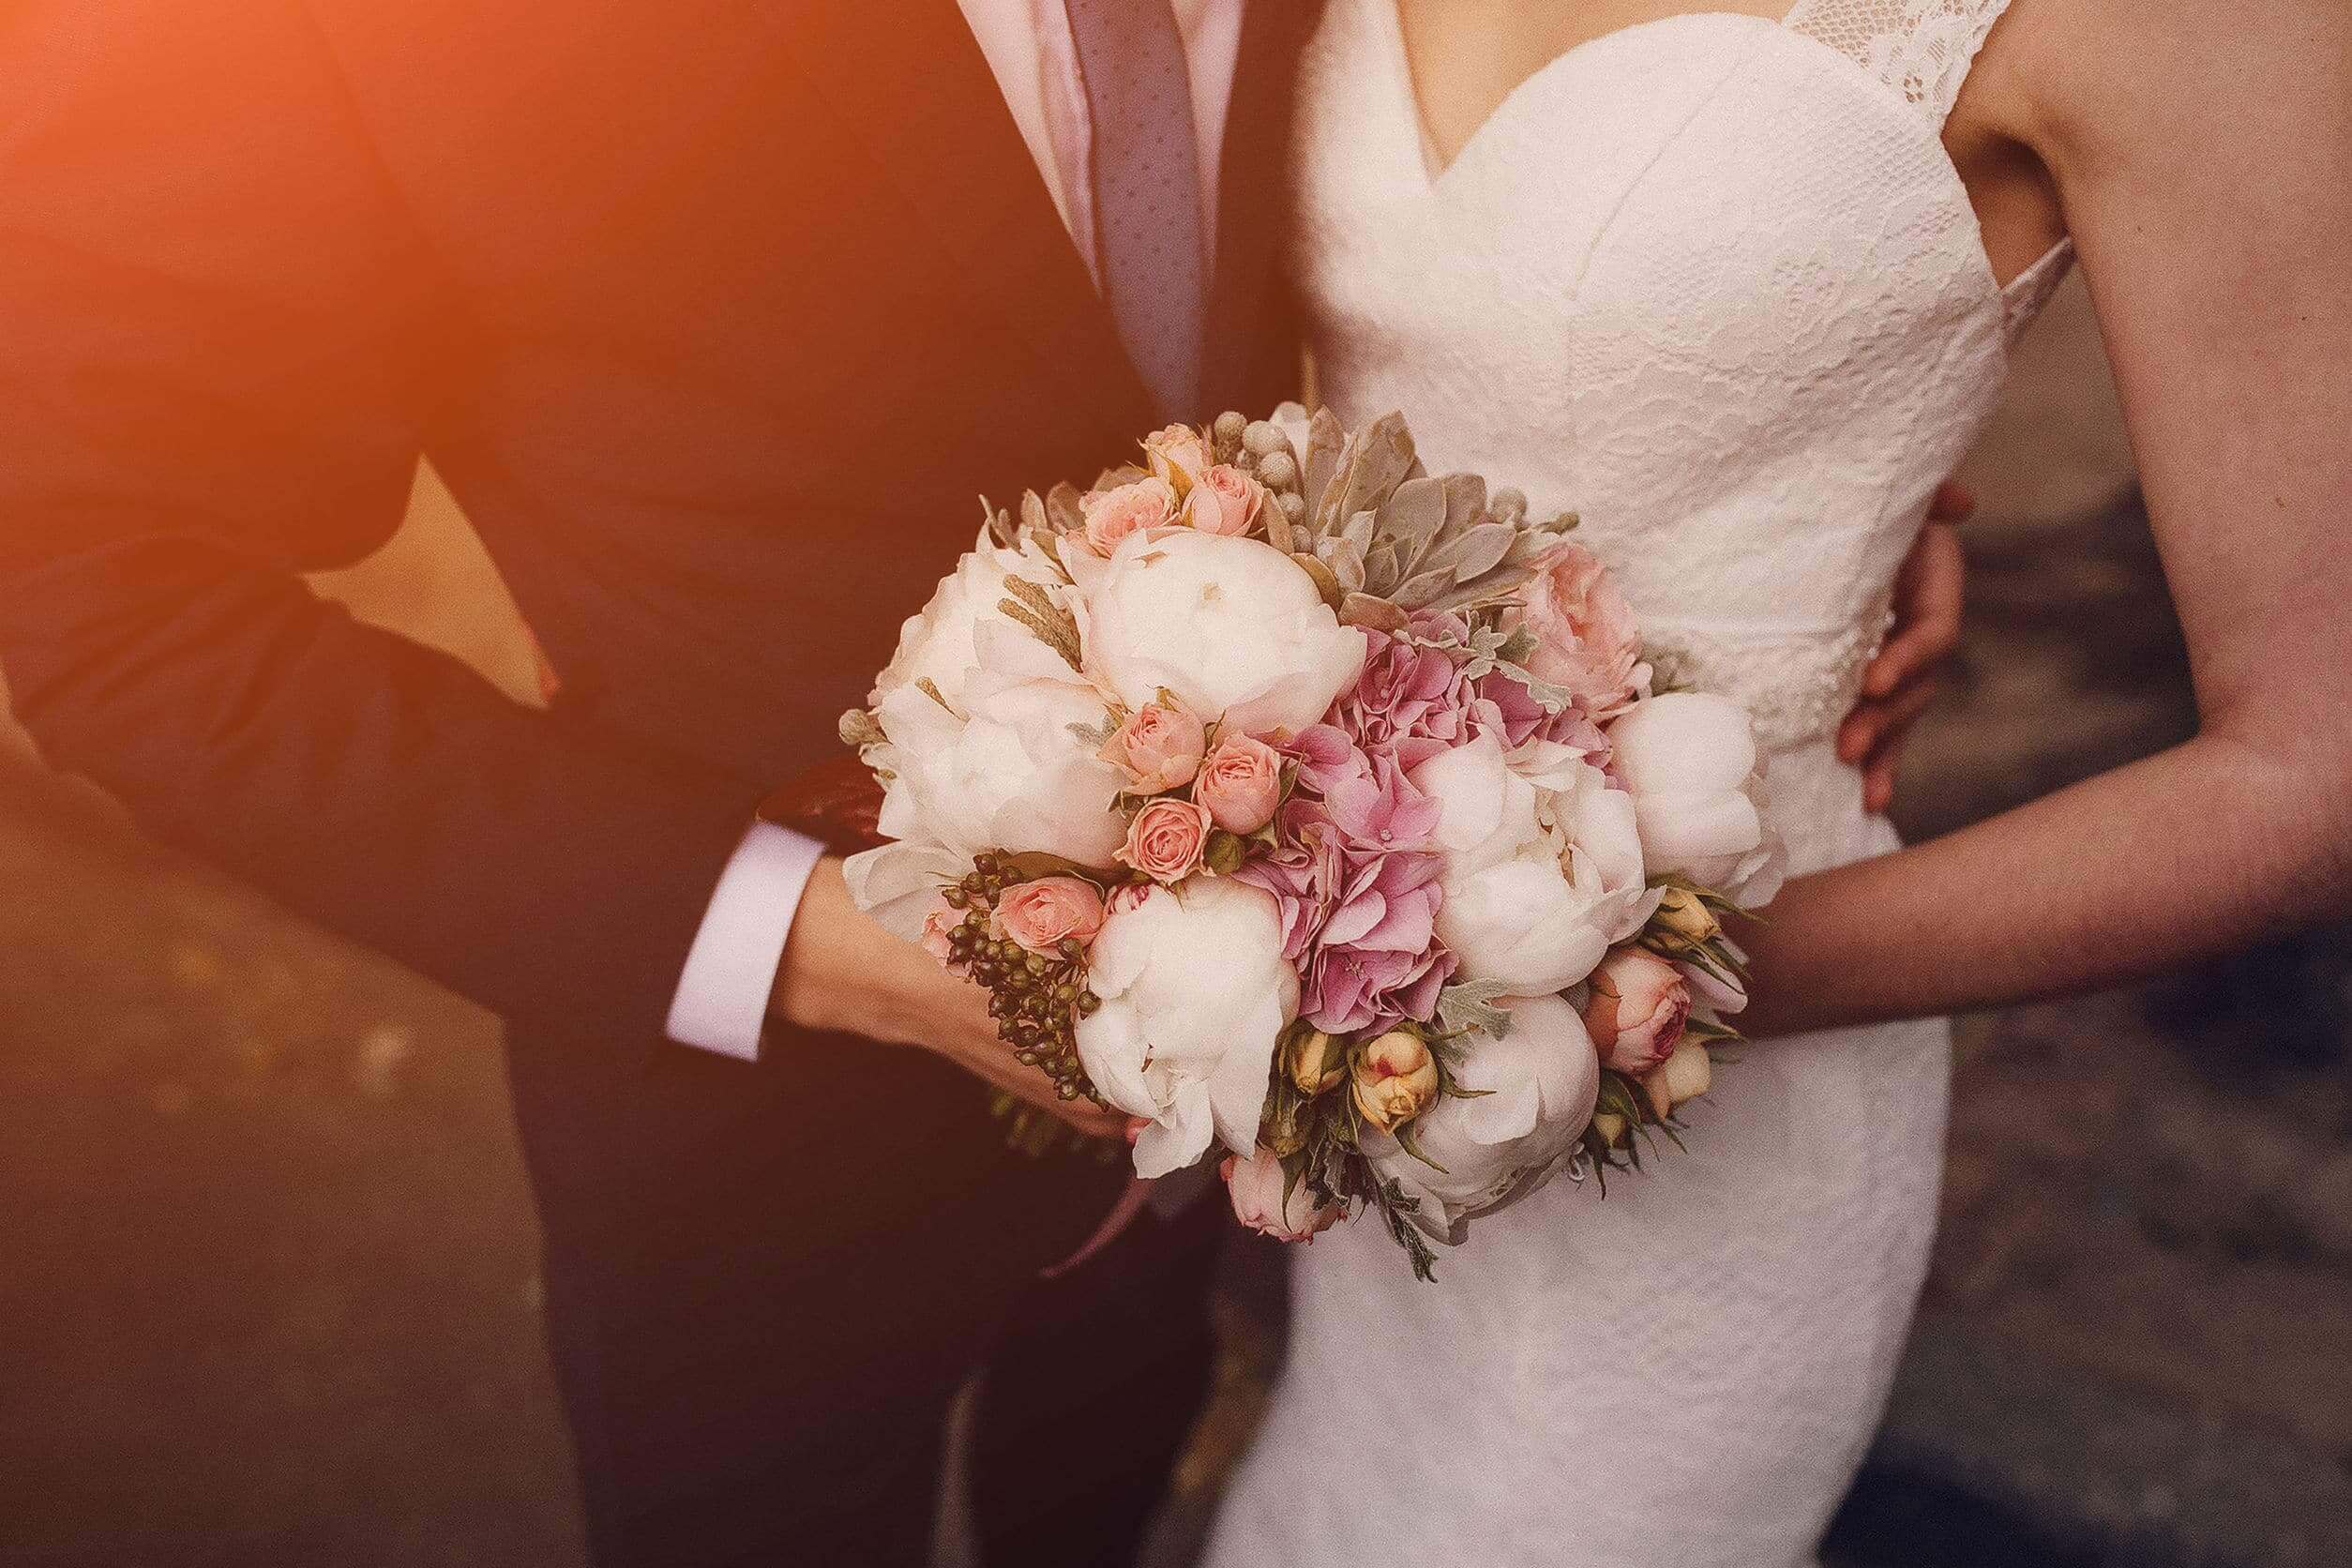 close up of bride and groom holding a bouquet of flowers